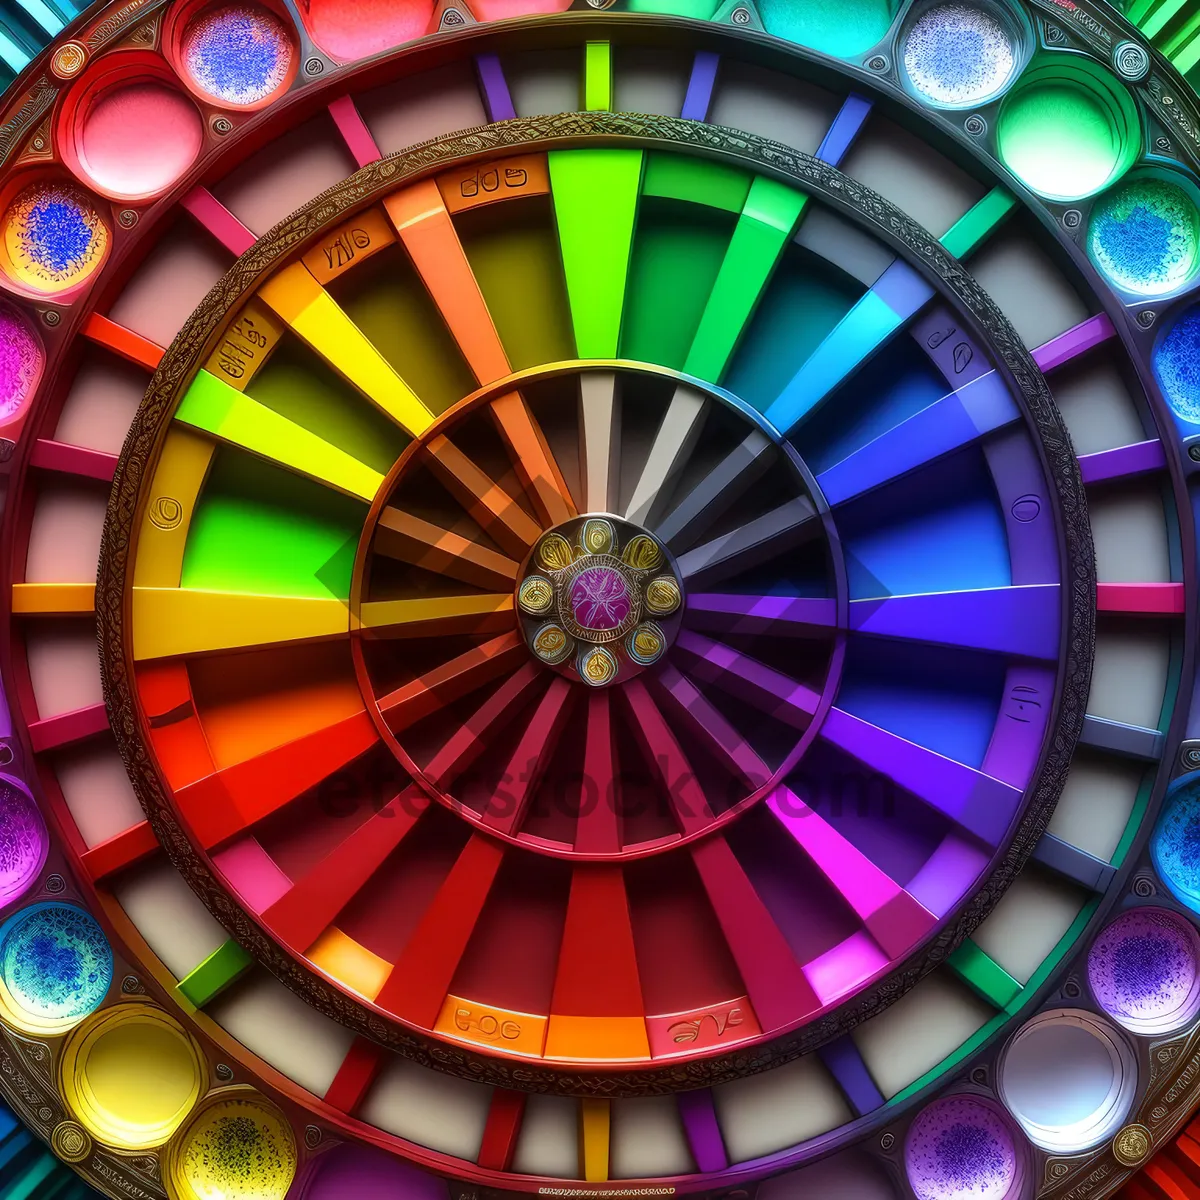 Picture of Digital Roulette Wheel Art with Mechanical Texture